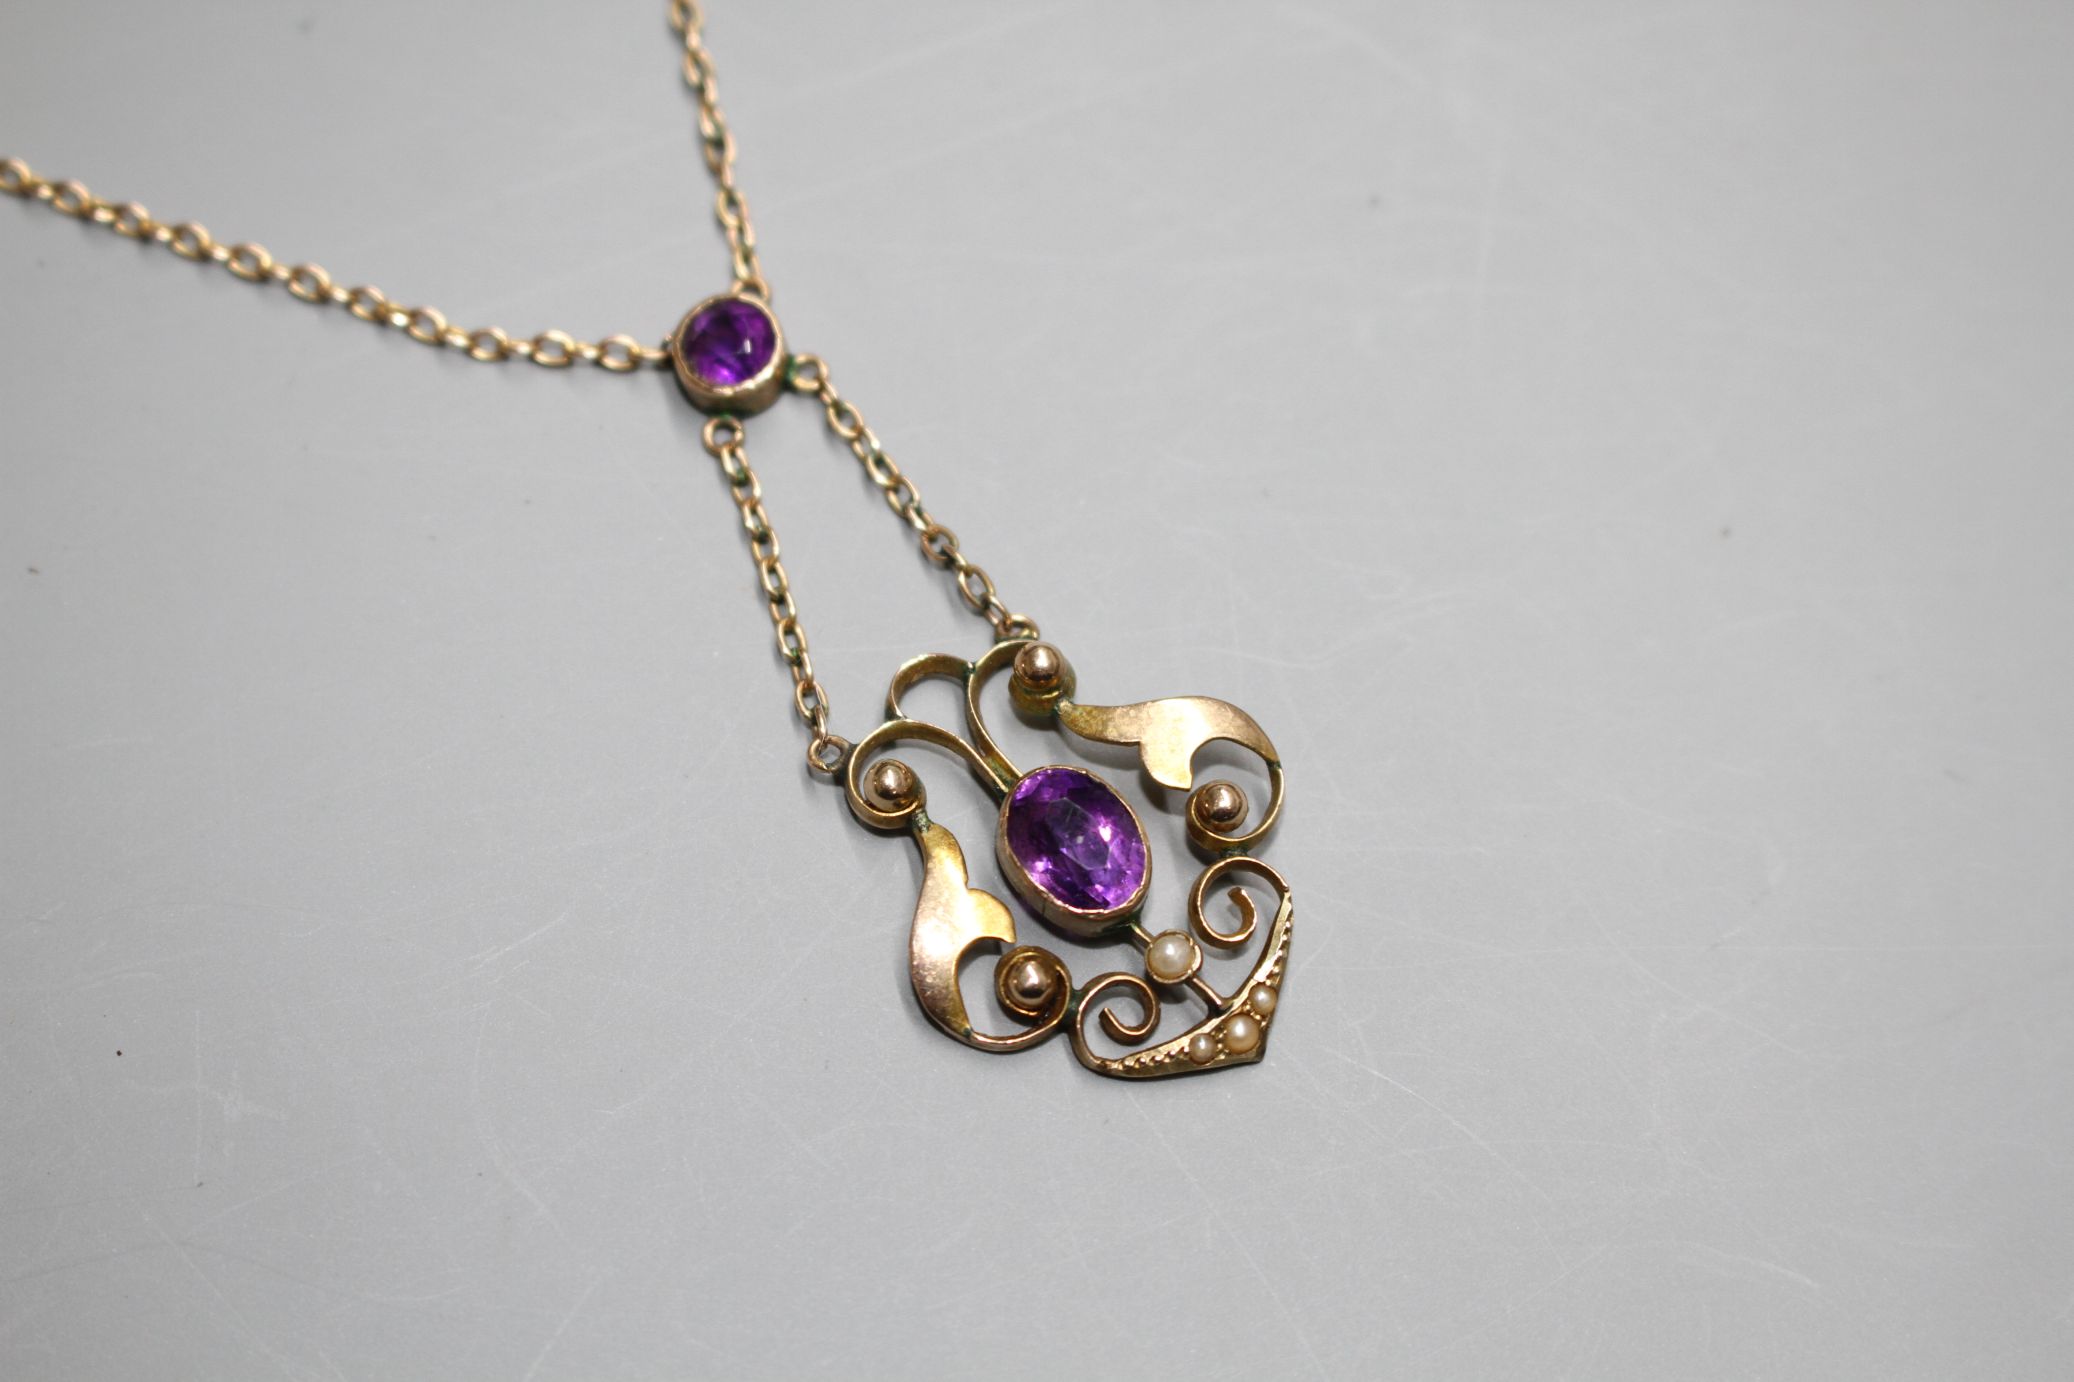 An Edwardian 9ct, amethyst and seed pearl set pendant necklace, pendant lower section 25mm. - Image 2 of 4